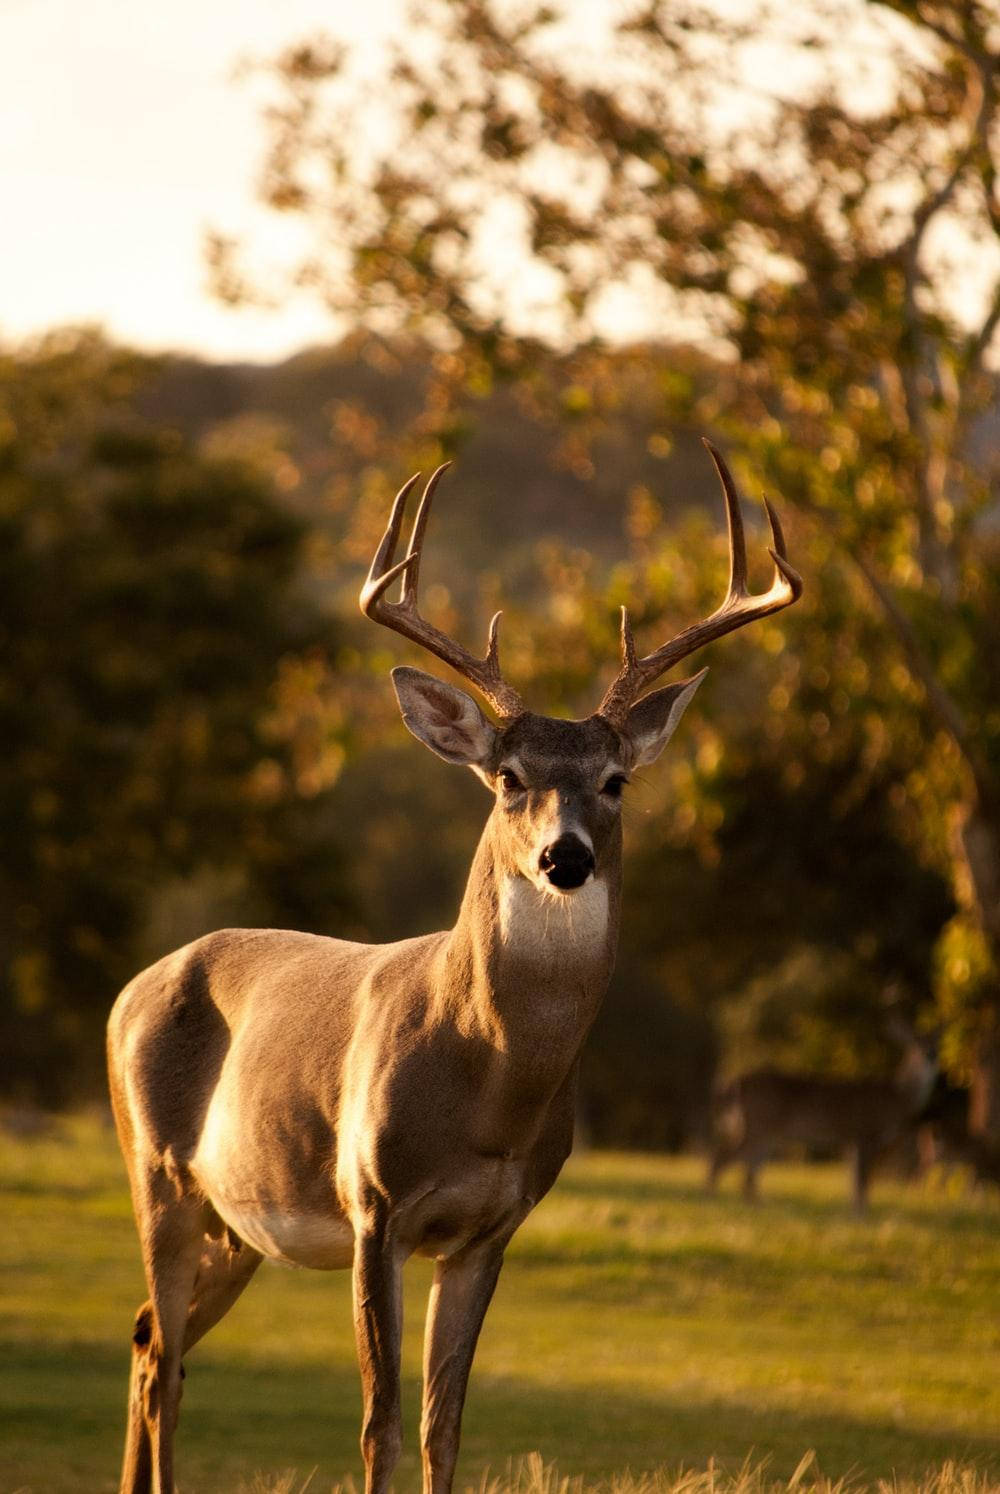 Full Hd Deer At Sunset Android